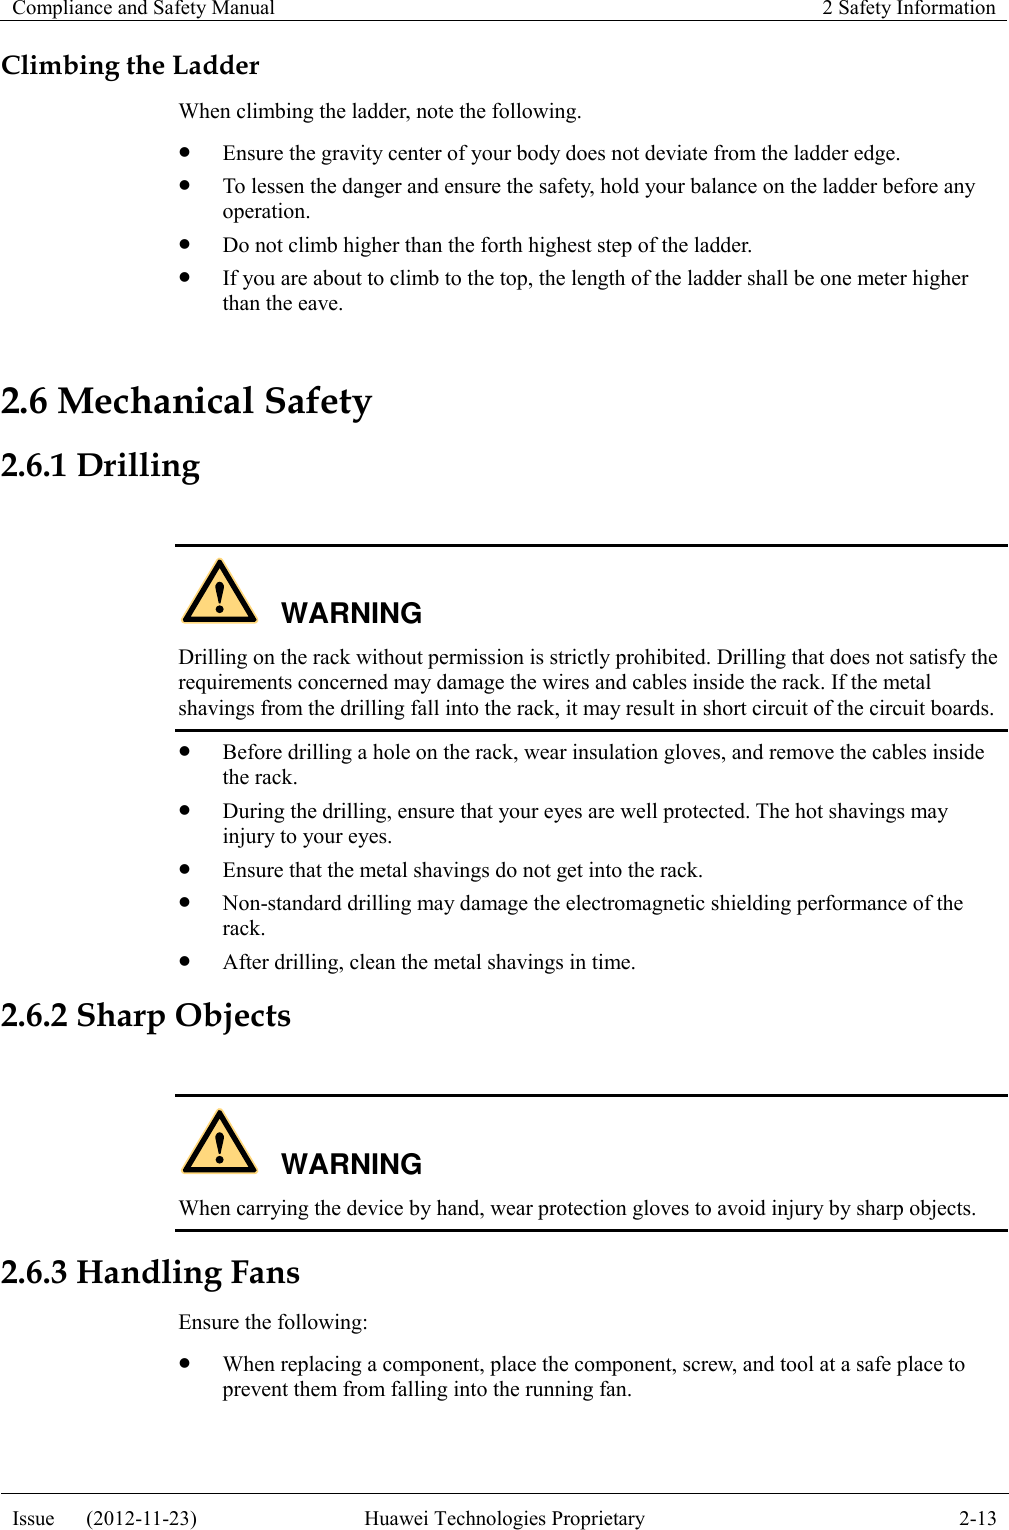 Compliance and Safety Manual 2 Safety Information  Issue      (2012-11-23) Huawei Technologies Proprietary 2-13  Climbing the Ladder When climbing the ladder, note the following.  Ensure the gravity center of your body does not deviate from the ladder edge.  To lessen the danger and ensure the safety, hold your balance on the ladder before any operation.  Do not climb higher than the forth highest step of the ladder.  If you are about to climb to the top, the length of the ladder shall be one meter higher than the eave. 2.6 Mechanical Safety 2.6.1 Drilling  WARNING Drilling on the rack without permission is strictly prohibited. Drilling that does not satisfy the requirements concerned may damage the wires and cables inside the rack. If the metal shavings from the drilling fall into the rack, it may result in short circuit of the circuit boards.  Before drilling a hole on the rack, wear insulation gloves, and remove the cables inside the rack.  During the drilling, ensure that your eyes are well protected. The hot shavings may injury to your eyes.  Ensure that the metal shavings do not get into the rack.  Non-standard drilling may damage the electromagnetic shielding performance of the rack.  After drilling, clean the metal shavings in time. 2.6.2 Sharp Objects  WARNING When carrying the device by hand, wear protection gloves to avoid injury by sharp objects. 2.6.3 Handling Fans Ensure the following:  When replacing a component, place the component, screw, and tool at a safe place to prevent them from falling into the running fan. 